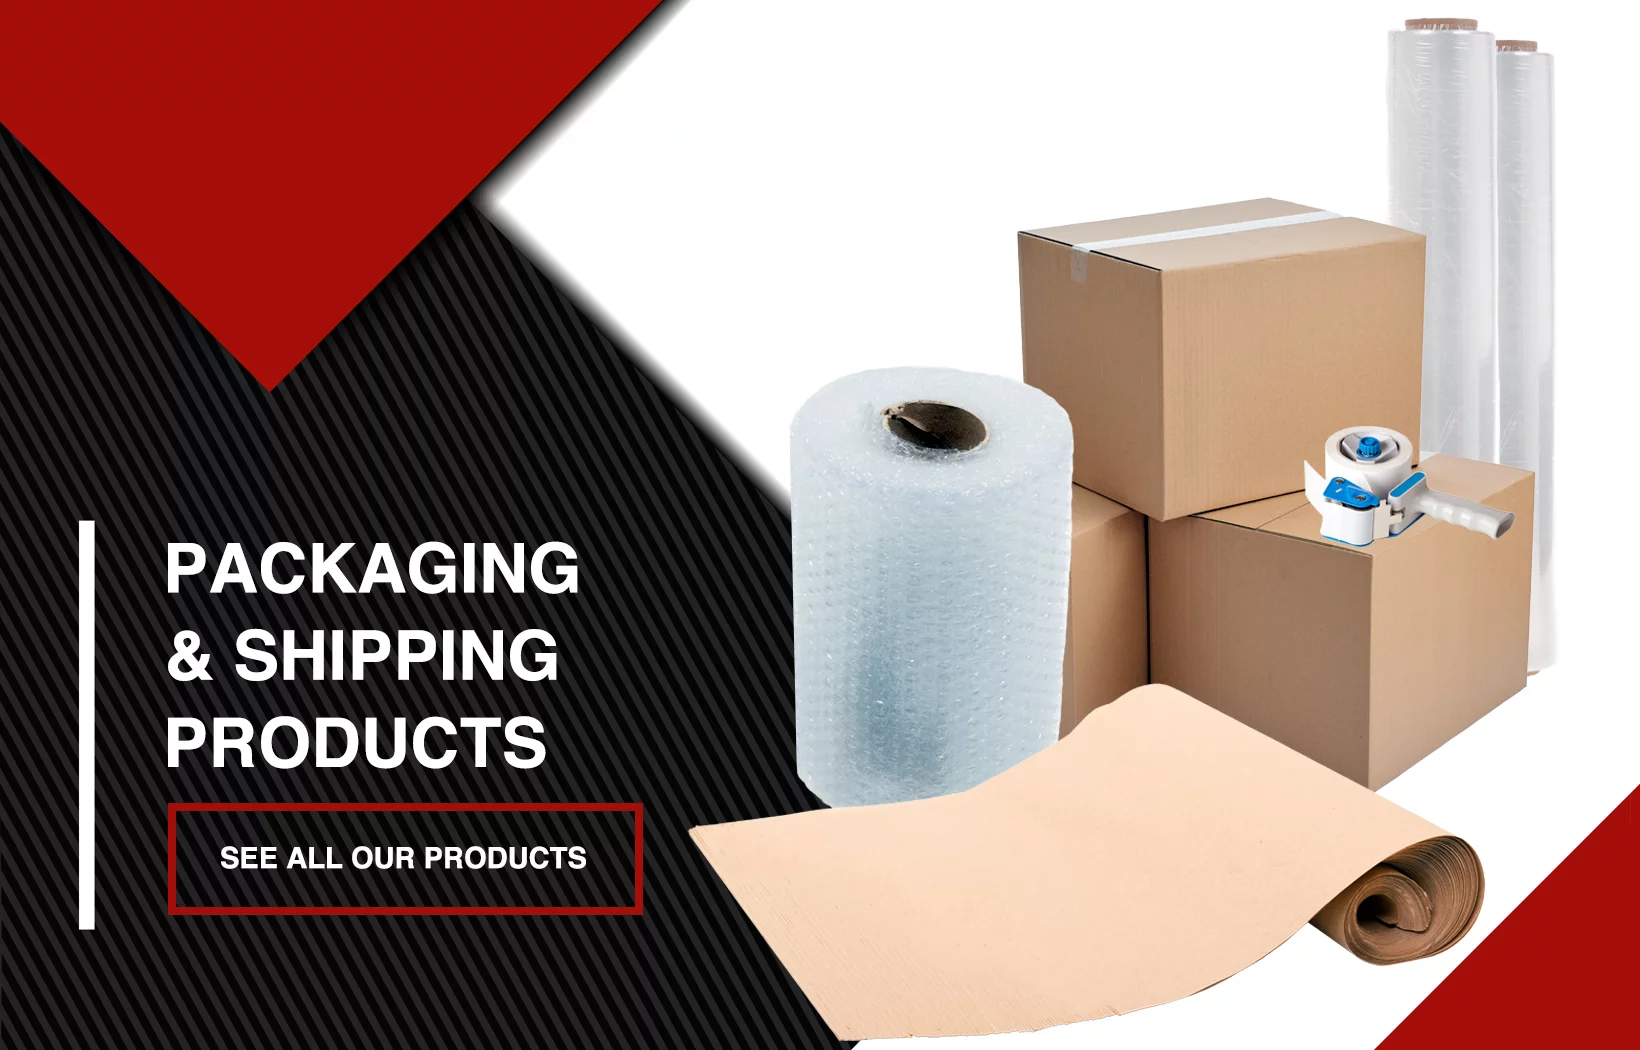 Cardboard Boxes For Shipping - Arteau Paper And Packaging Montreal